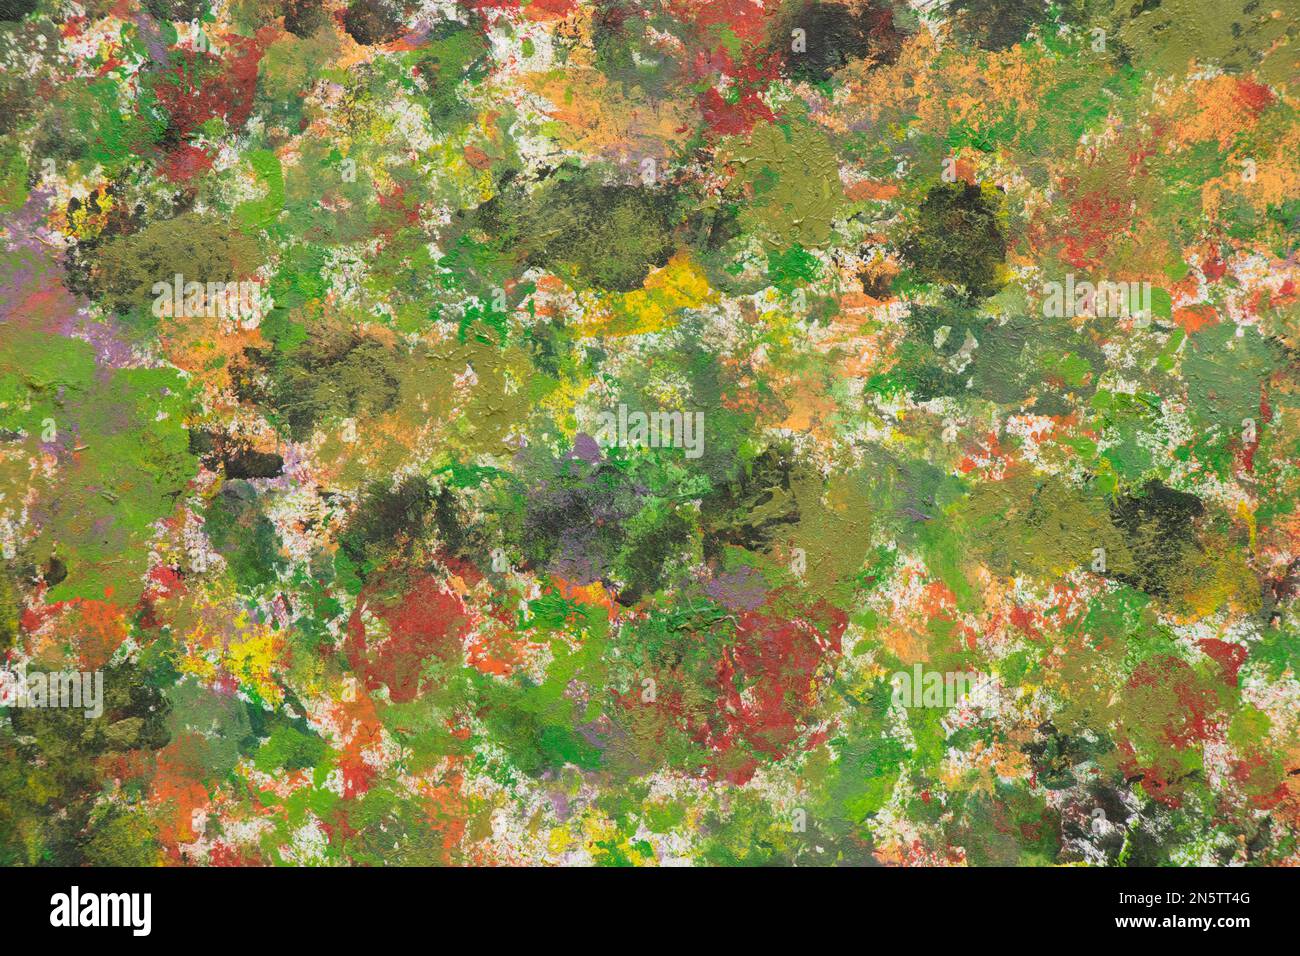 Camouflage military background painted with paints on paper, camouflage Stock Photo